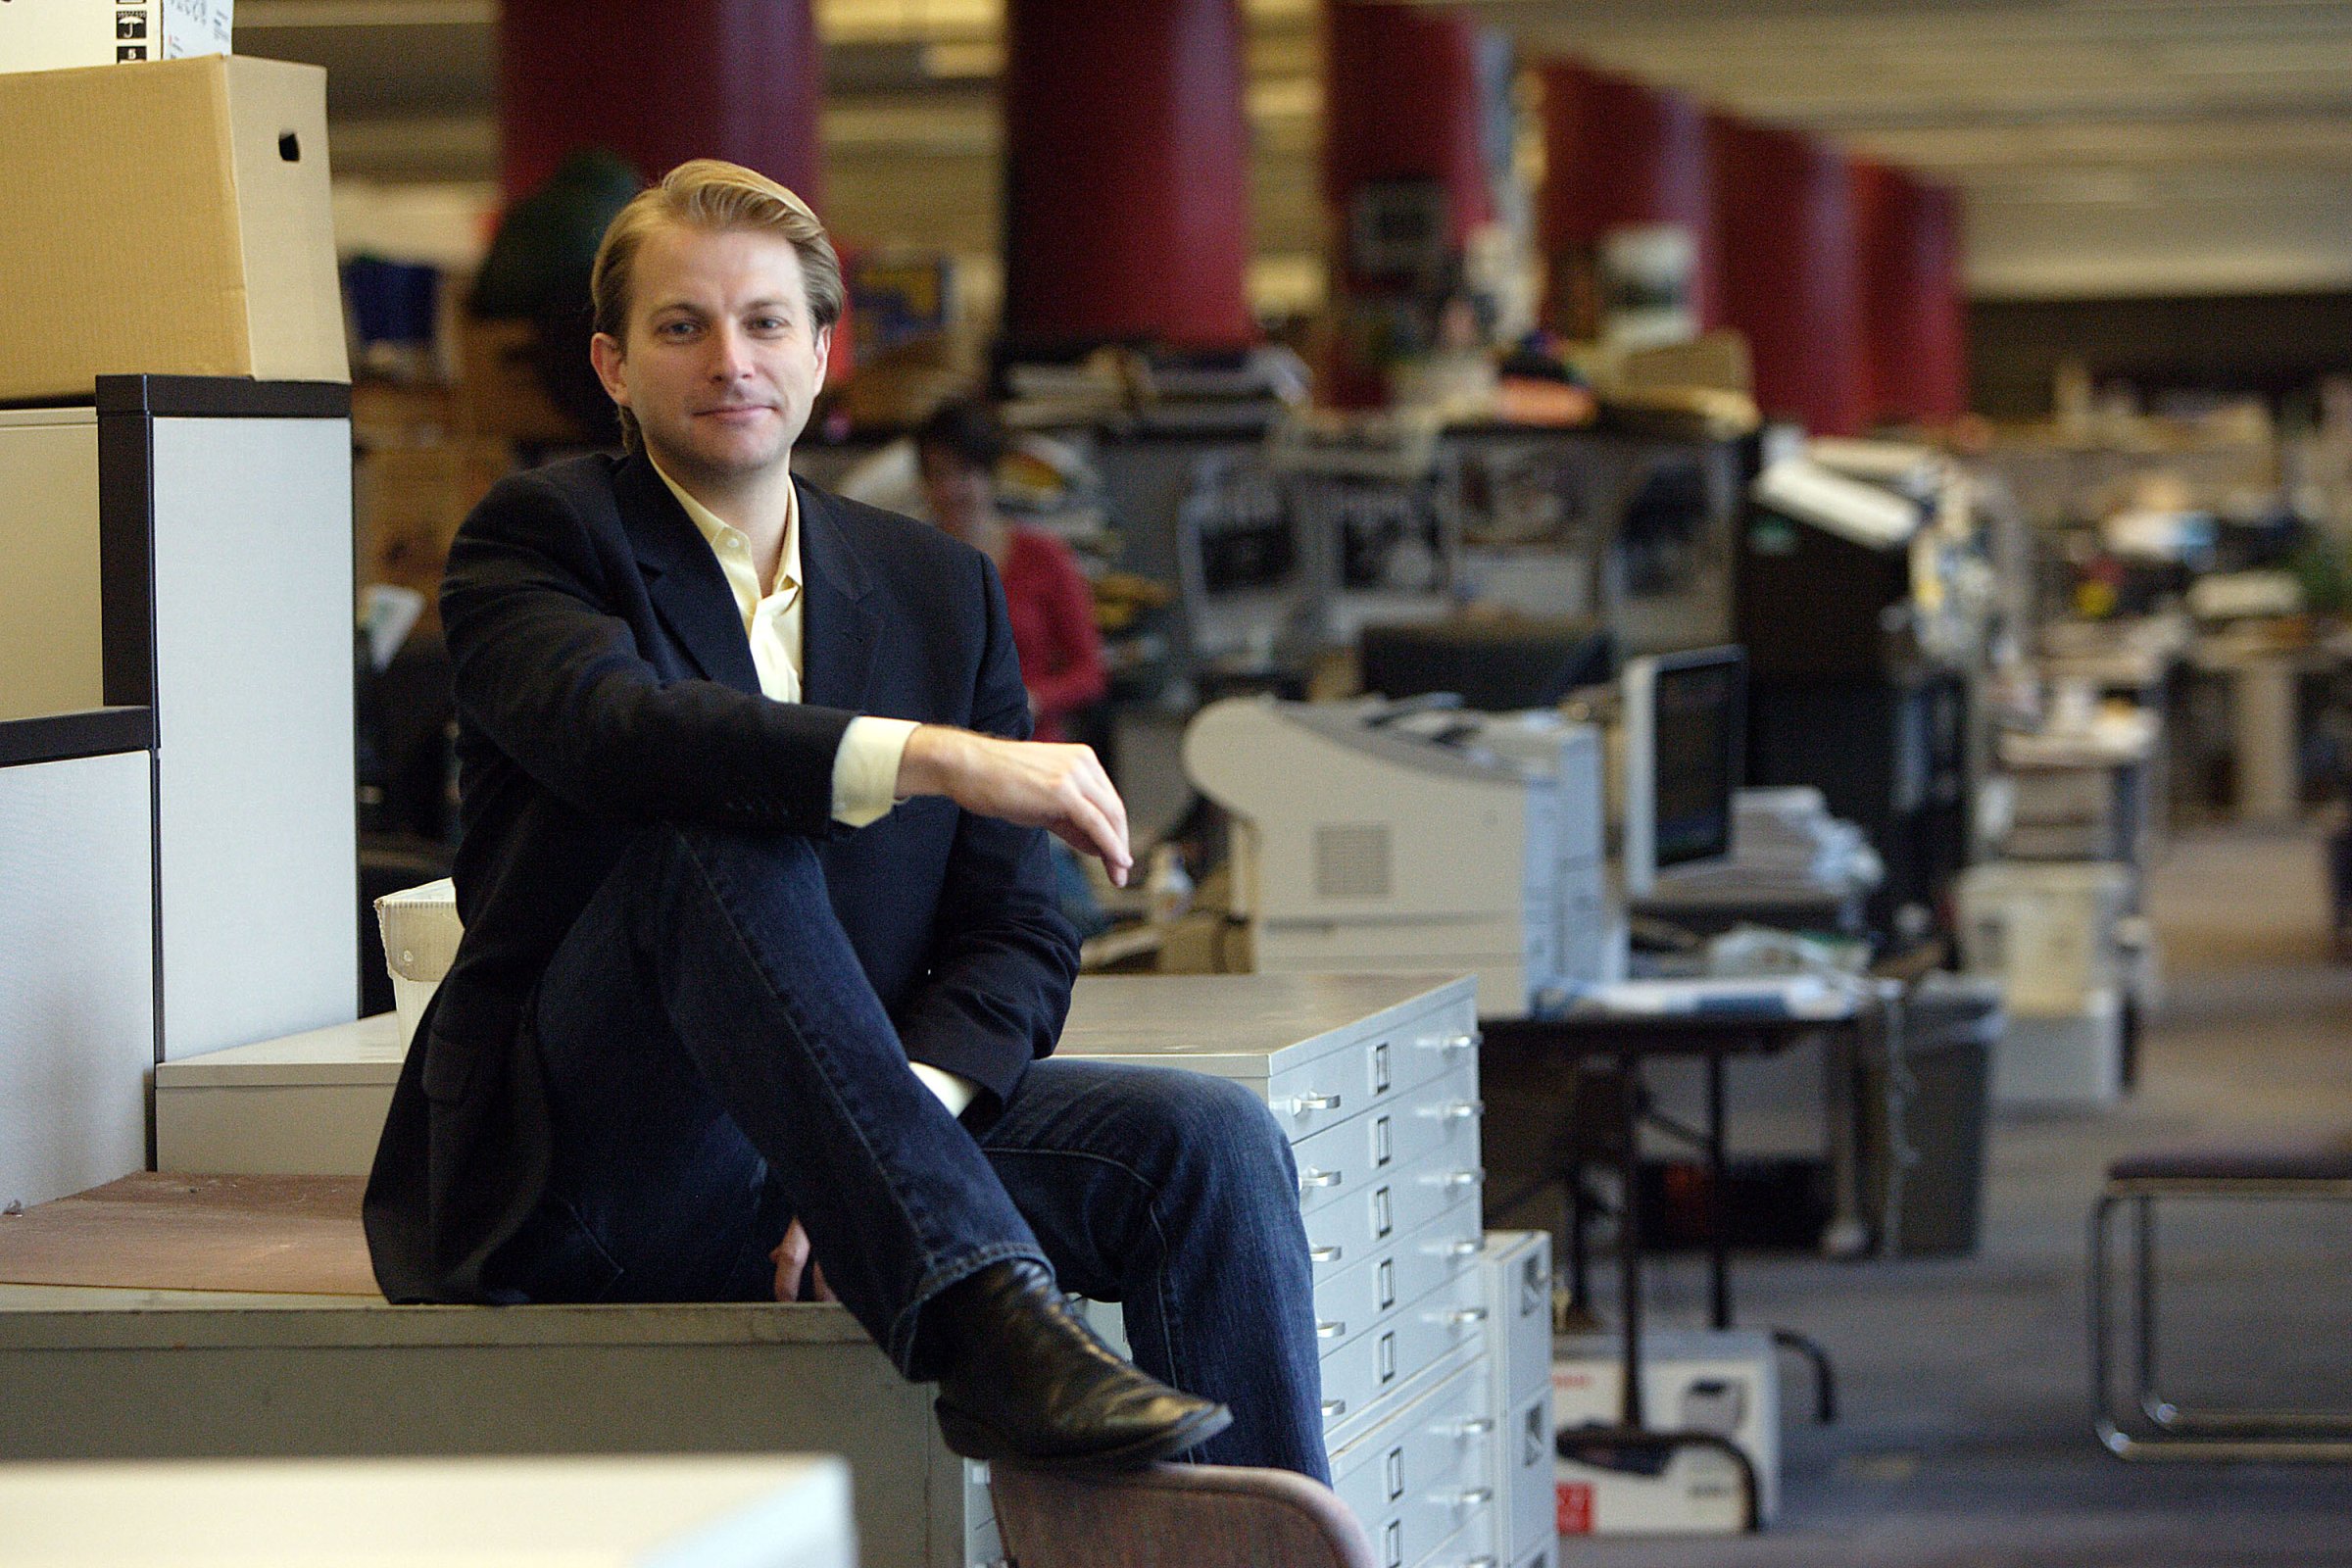 New York Daily News gossip columnist Ben Widdicombe photographed at his desk at the New York Daily News on March 29, 2005 in New York City.